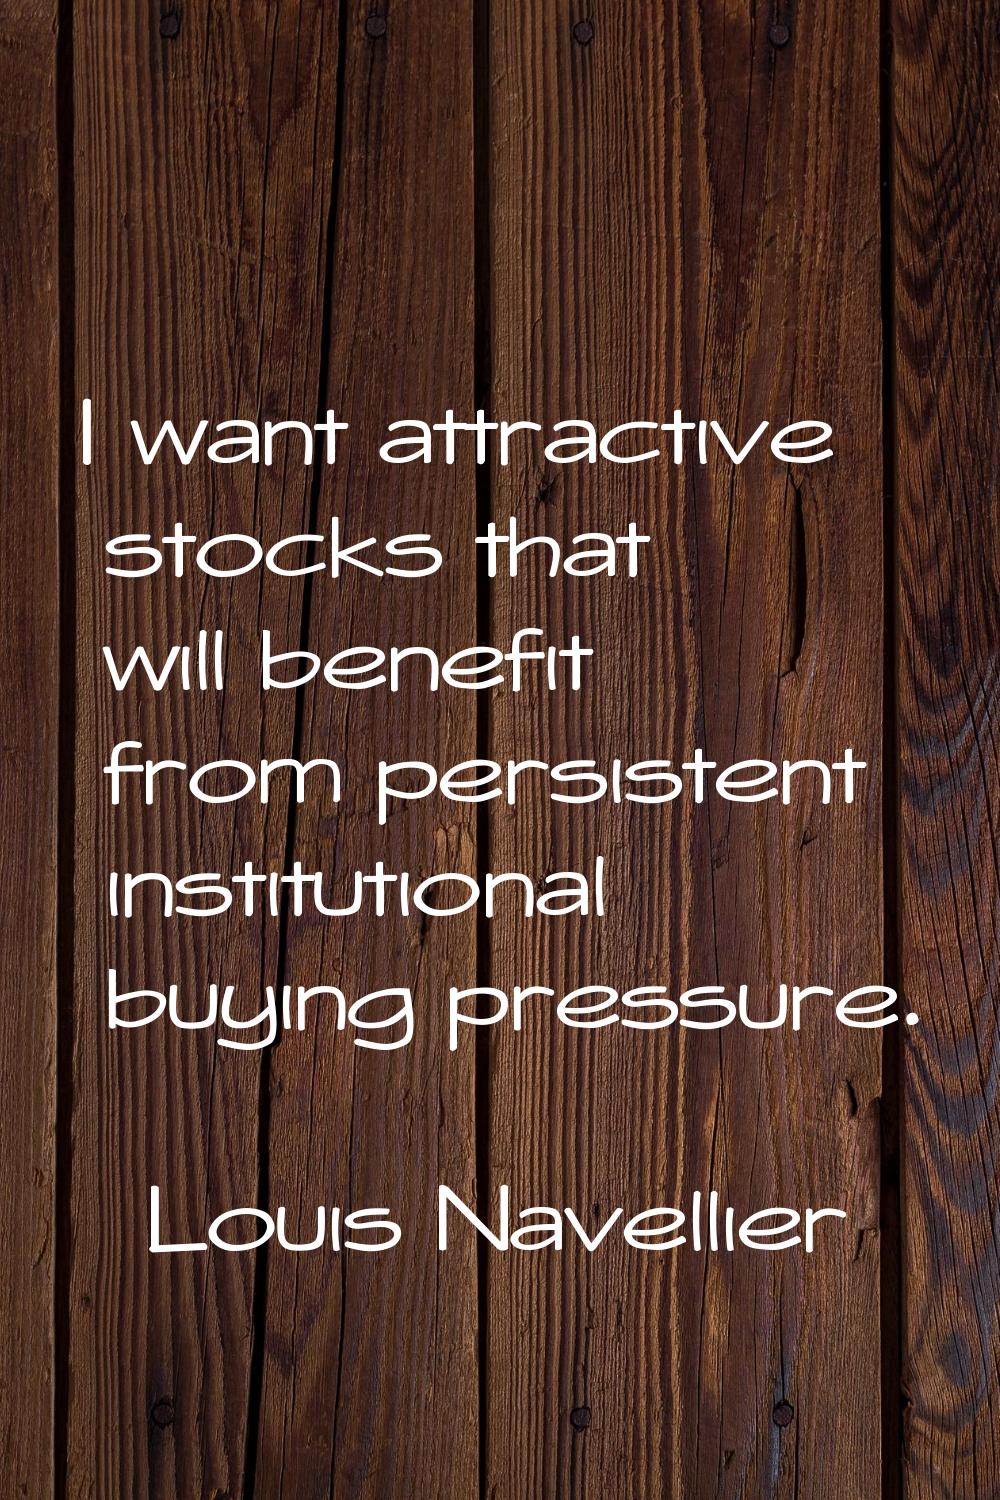 I want attractive stocks that will benefit from persistent institutional buying pressure.